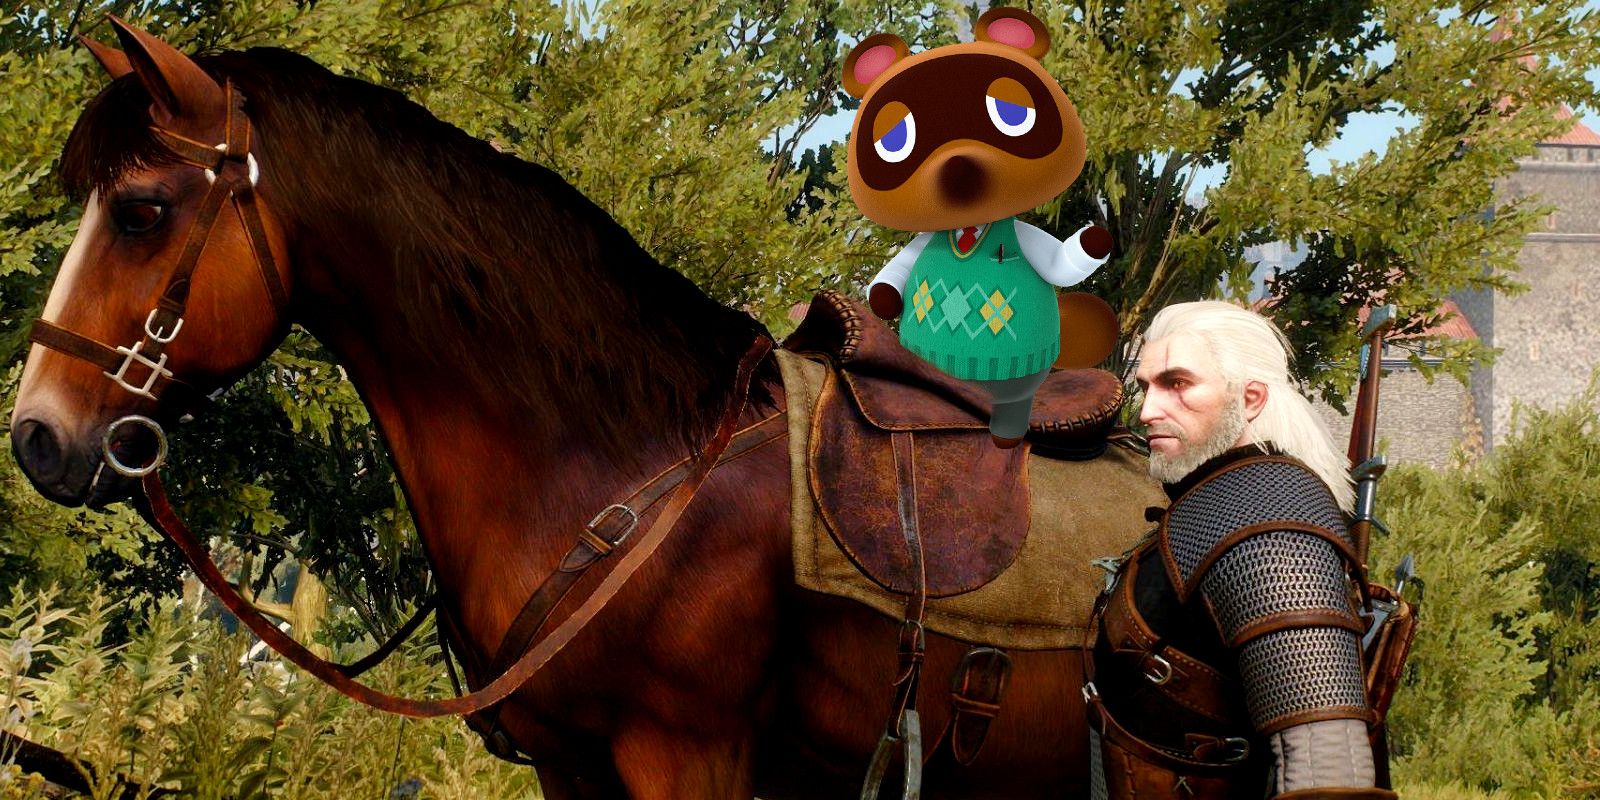 Animal Crossing's Tom Nook in The Witcher 3